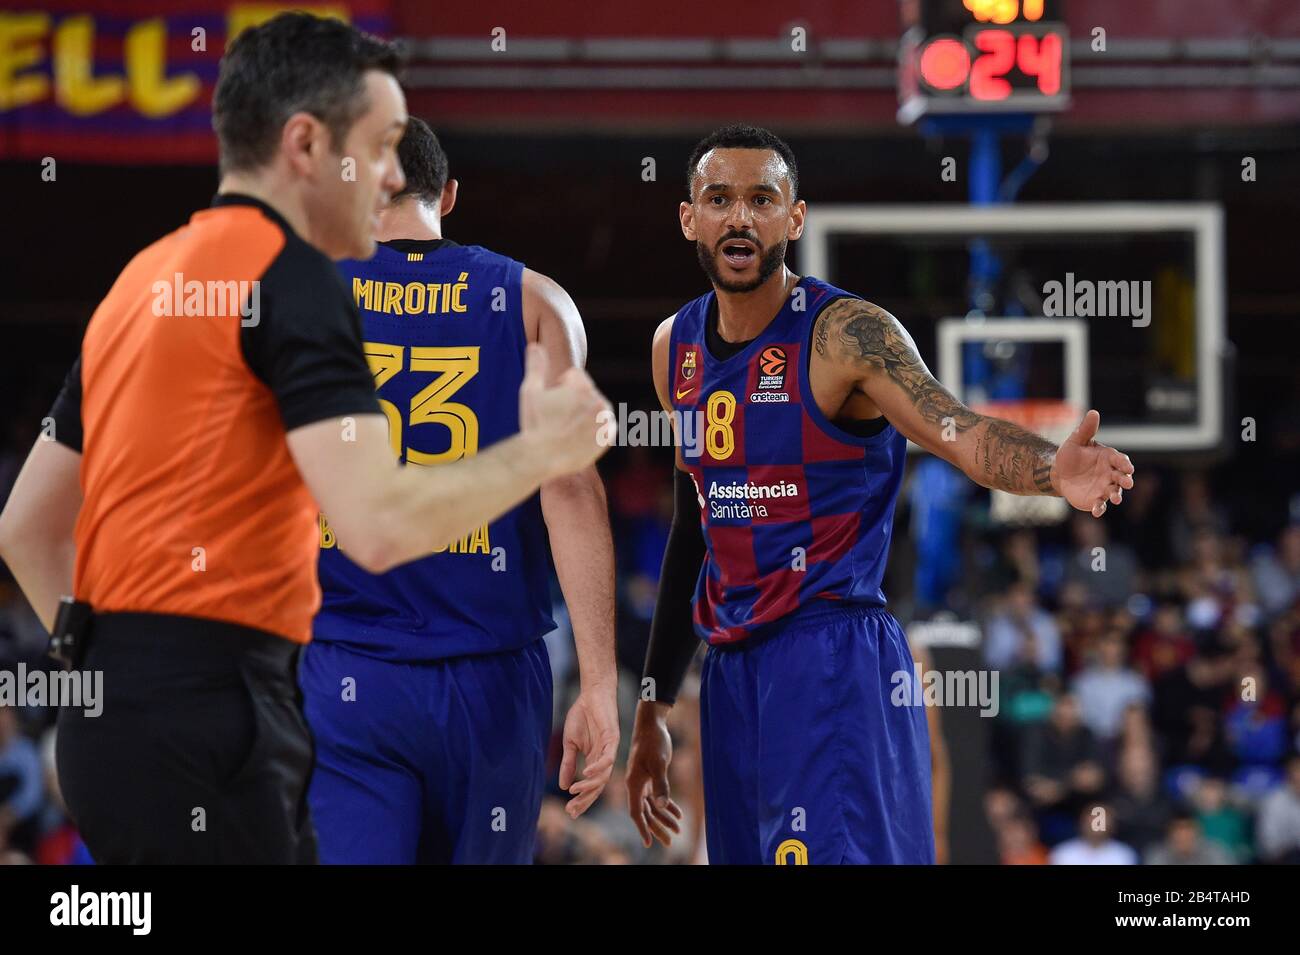 Barcelona, Spain. 06th Mar, 2020. Adam Hanga of FC Barcelona in action  during the EuroLeague basketball match played between FC Barcelona Basquet  and FC Bayern Munich Basketball at Palau Blaugrana on March